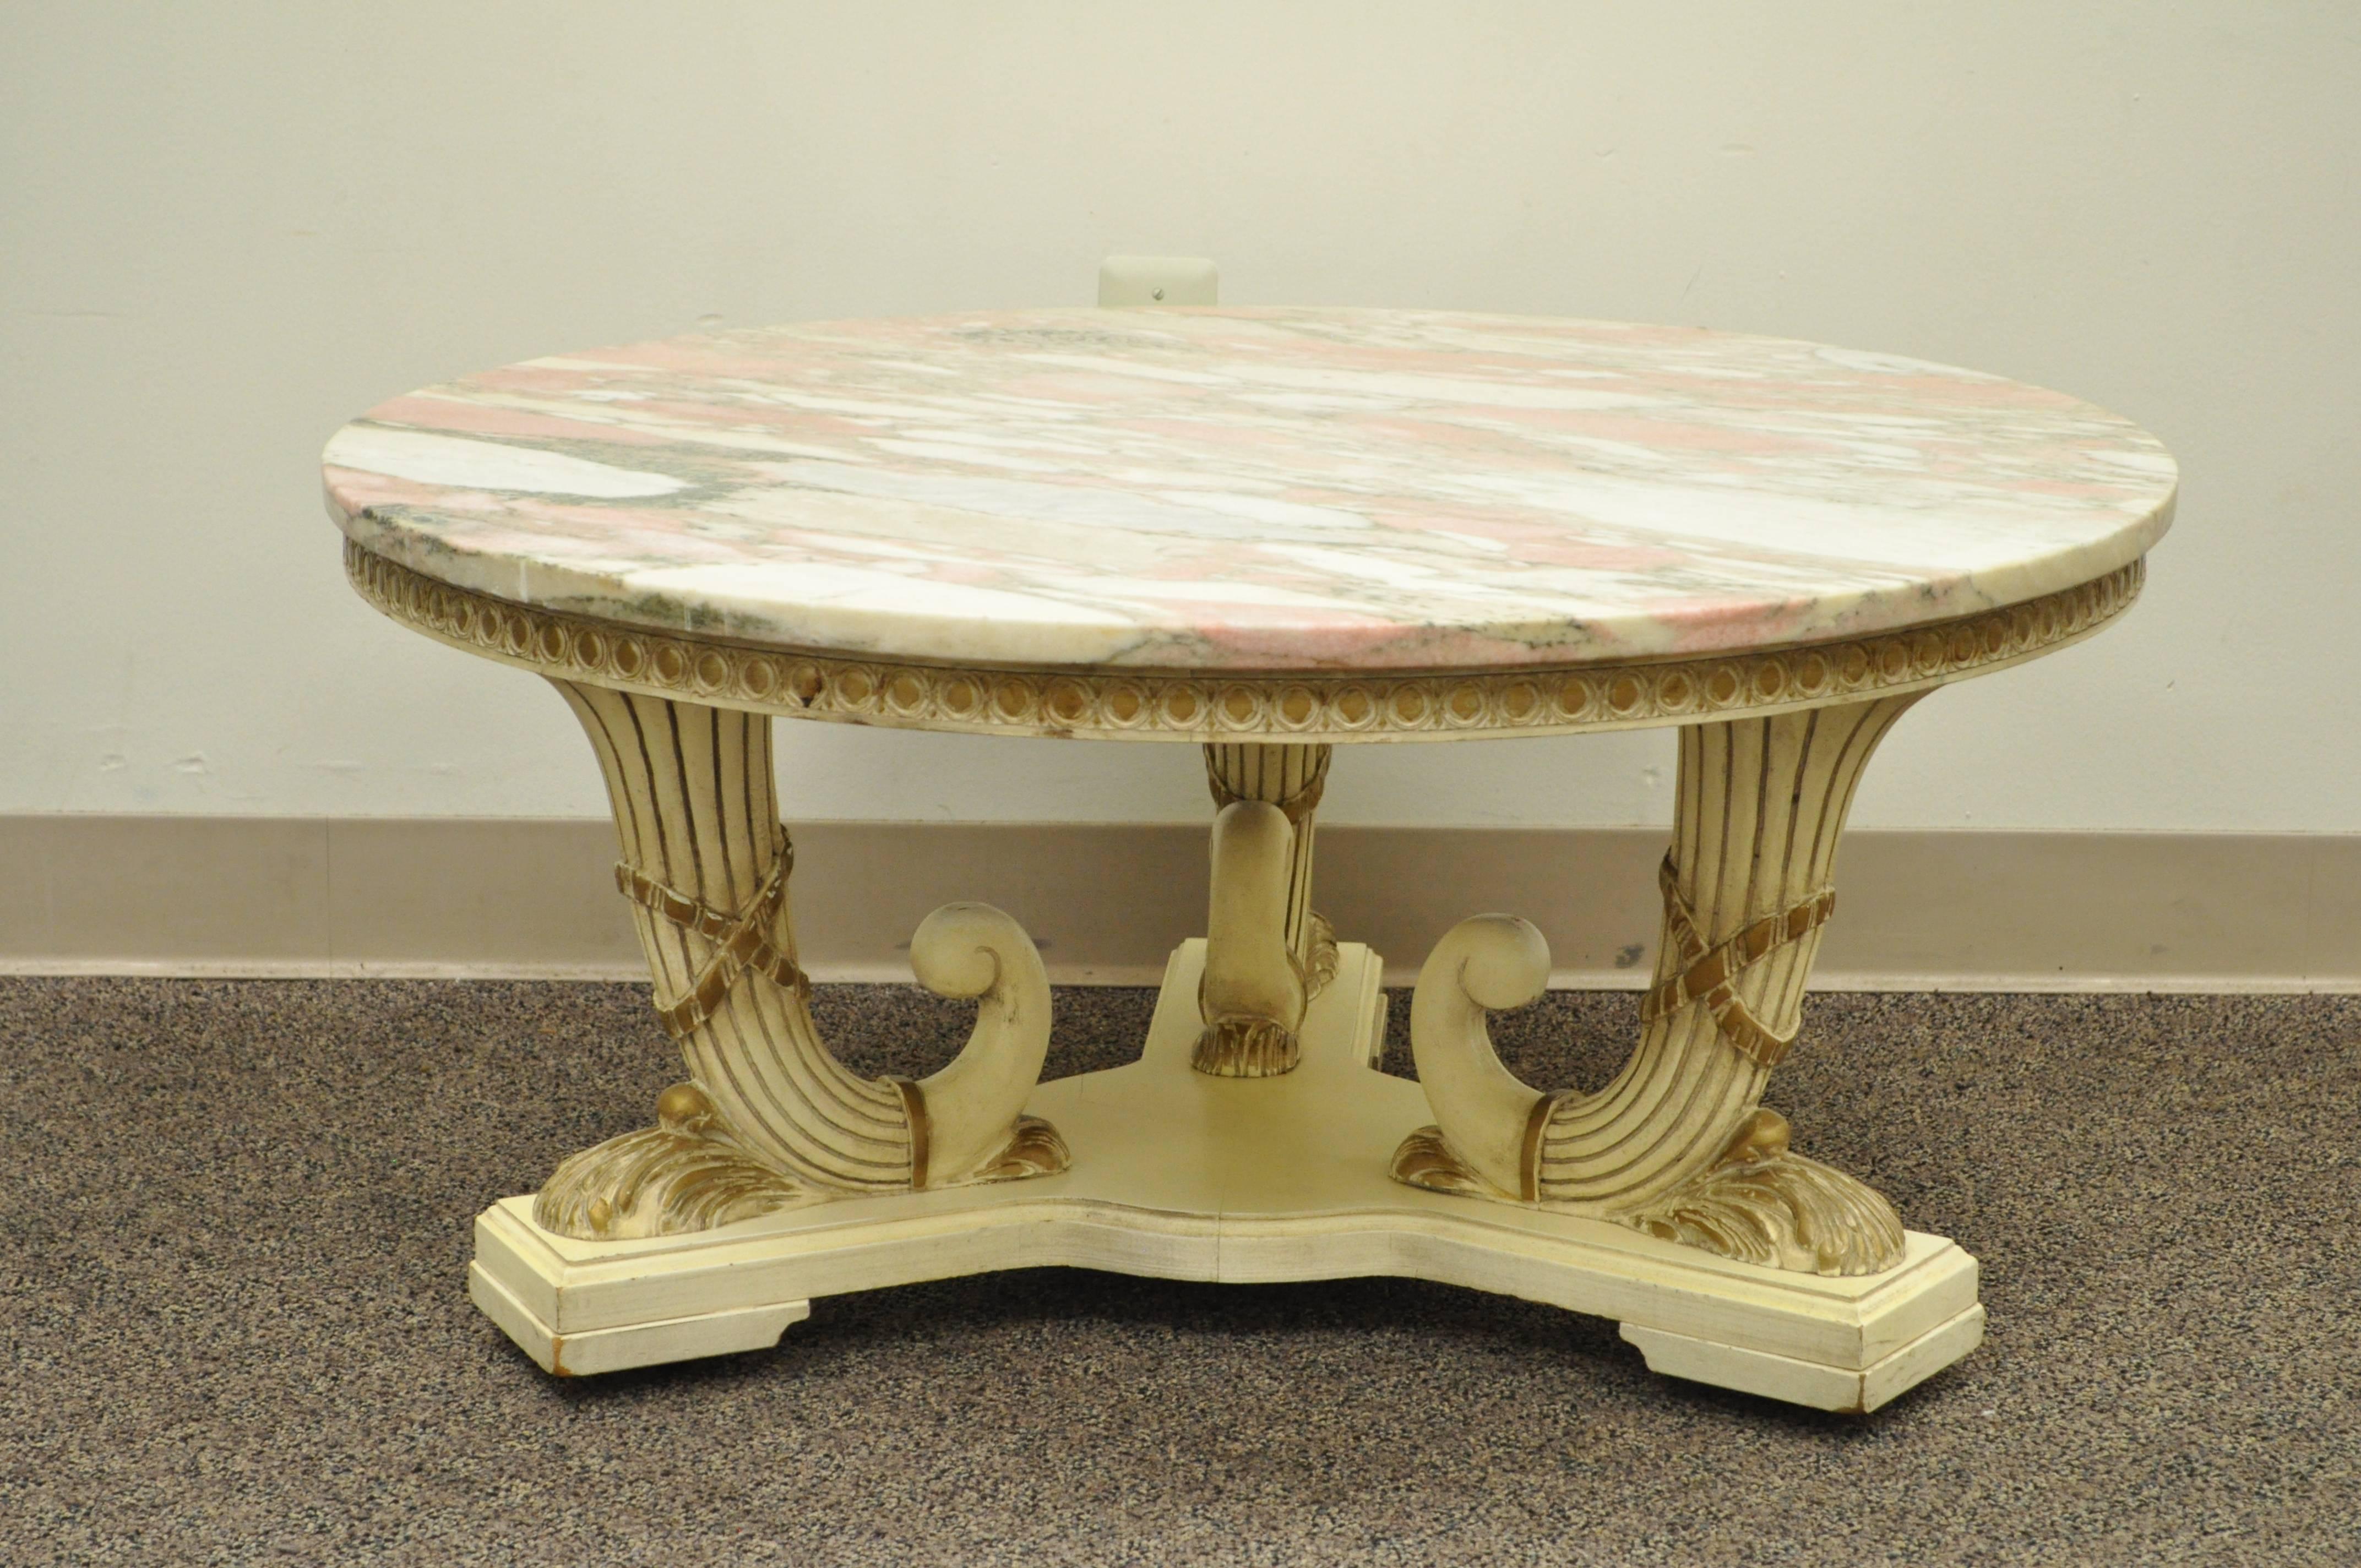 Vintage French Empire / Neoclassical style marble top coffee table. Item features a triple cornucopia carved wood base, pink round marble-top, off white original painted finish and rolling casters.